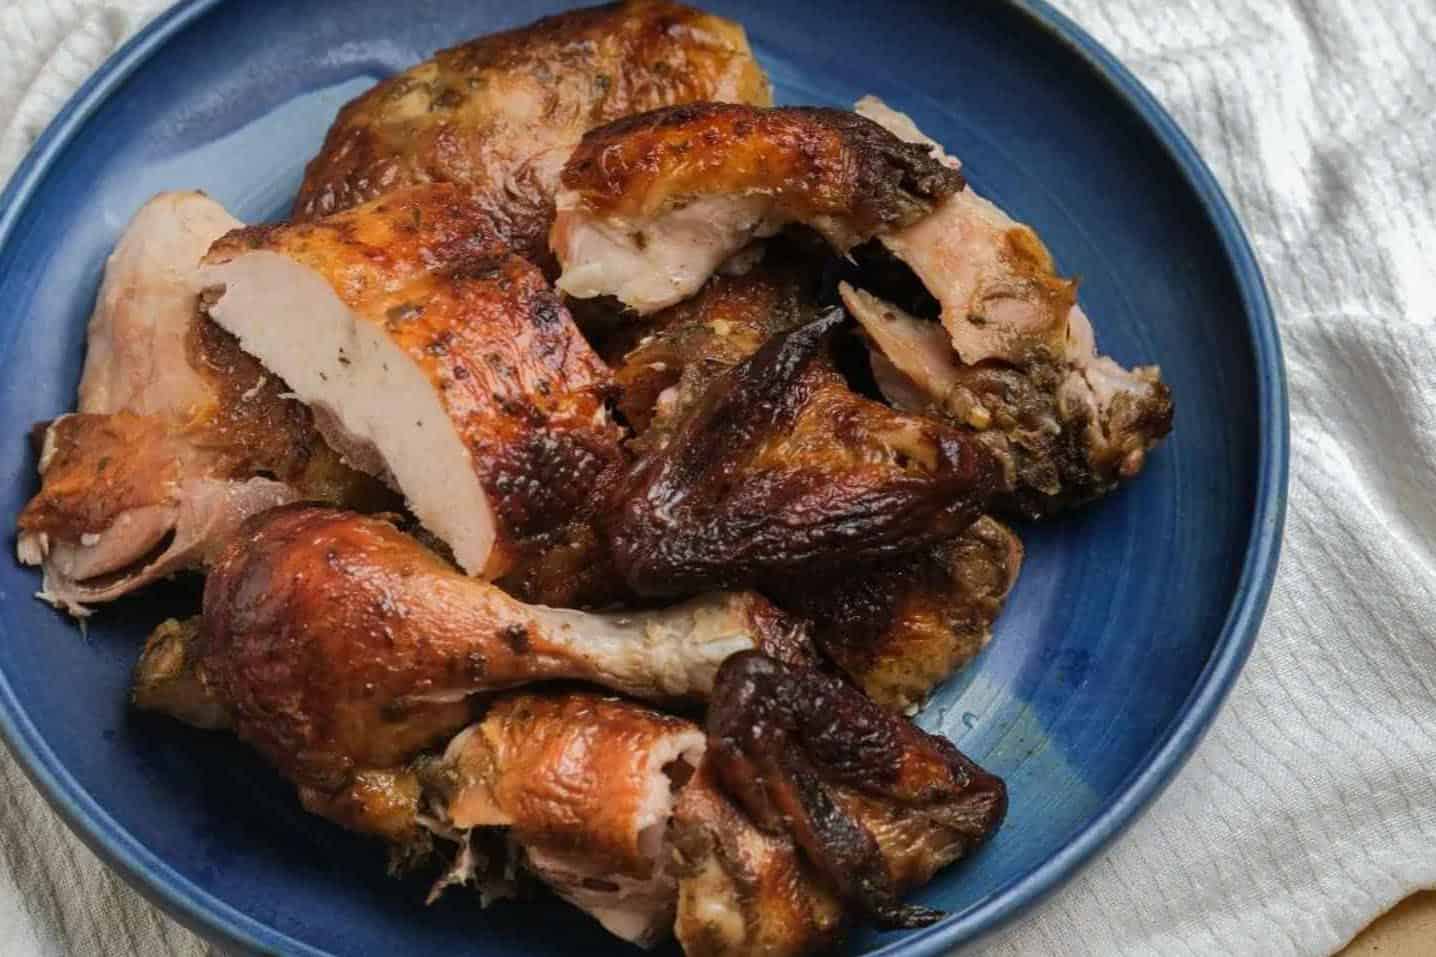 How Long Can Rotisserie Chicken Stay Out